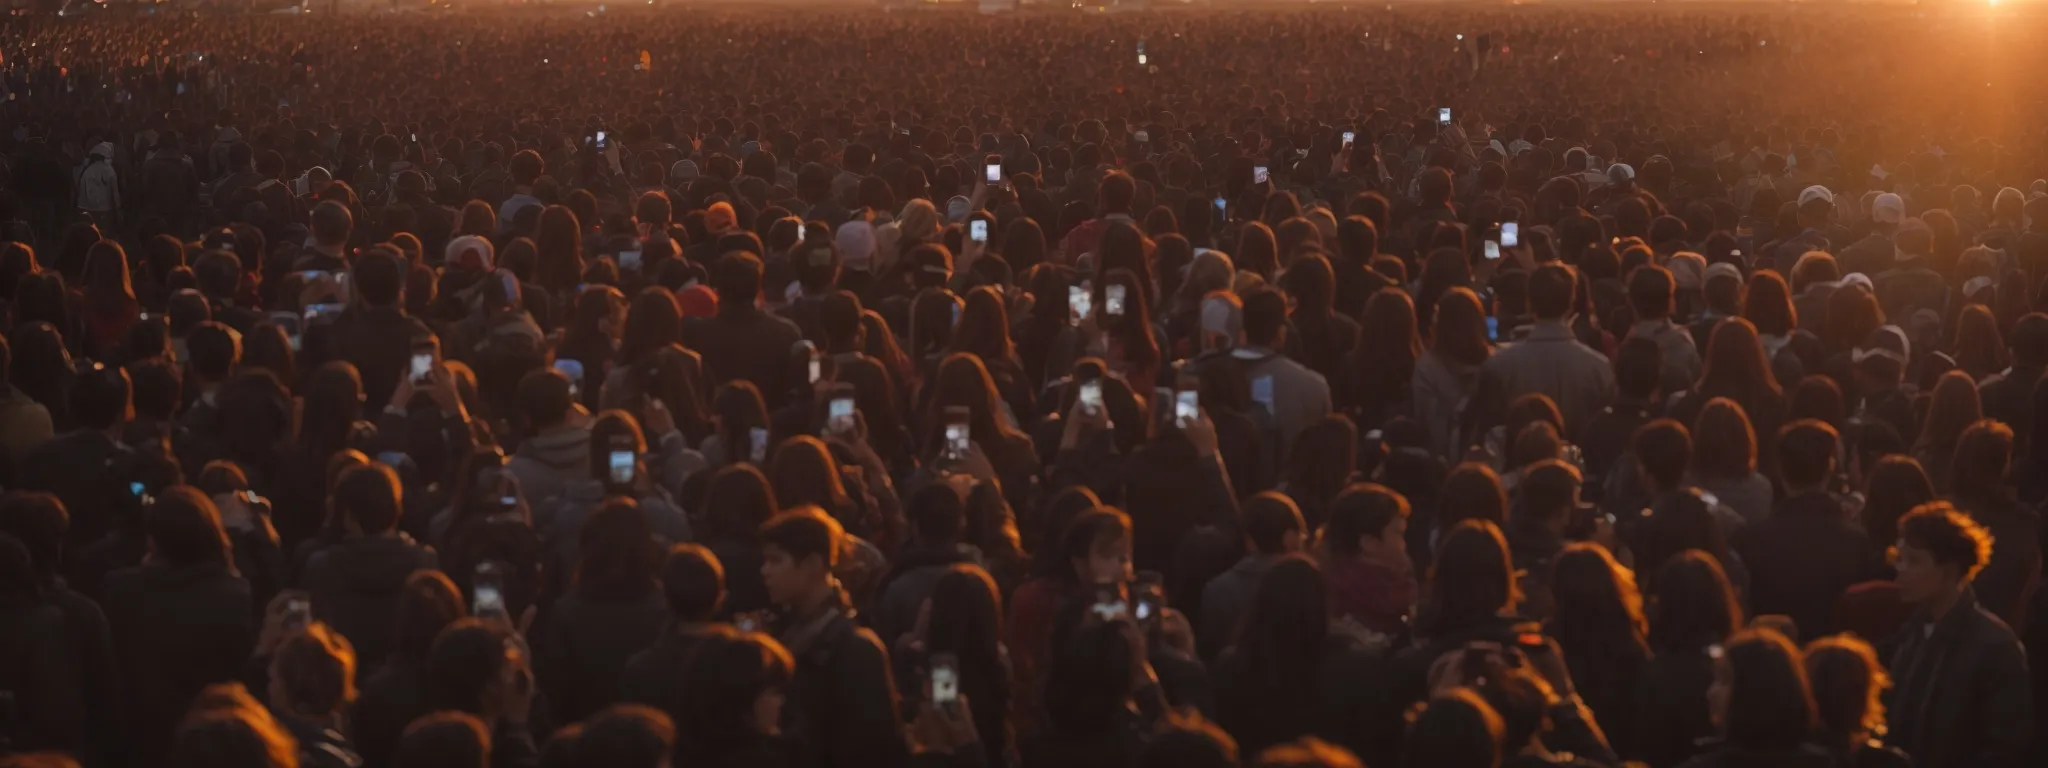 a vibrant, high-resolution image of a crowd at sunset, where the silhouettes of people are holding their smartphones up to capture the moment.